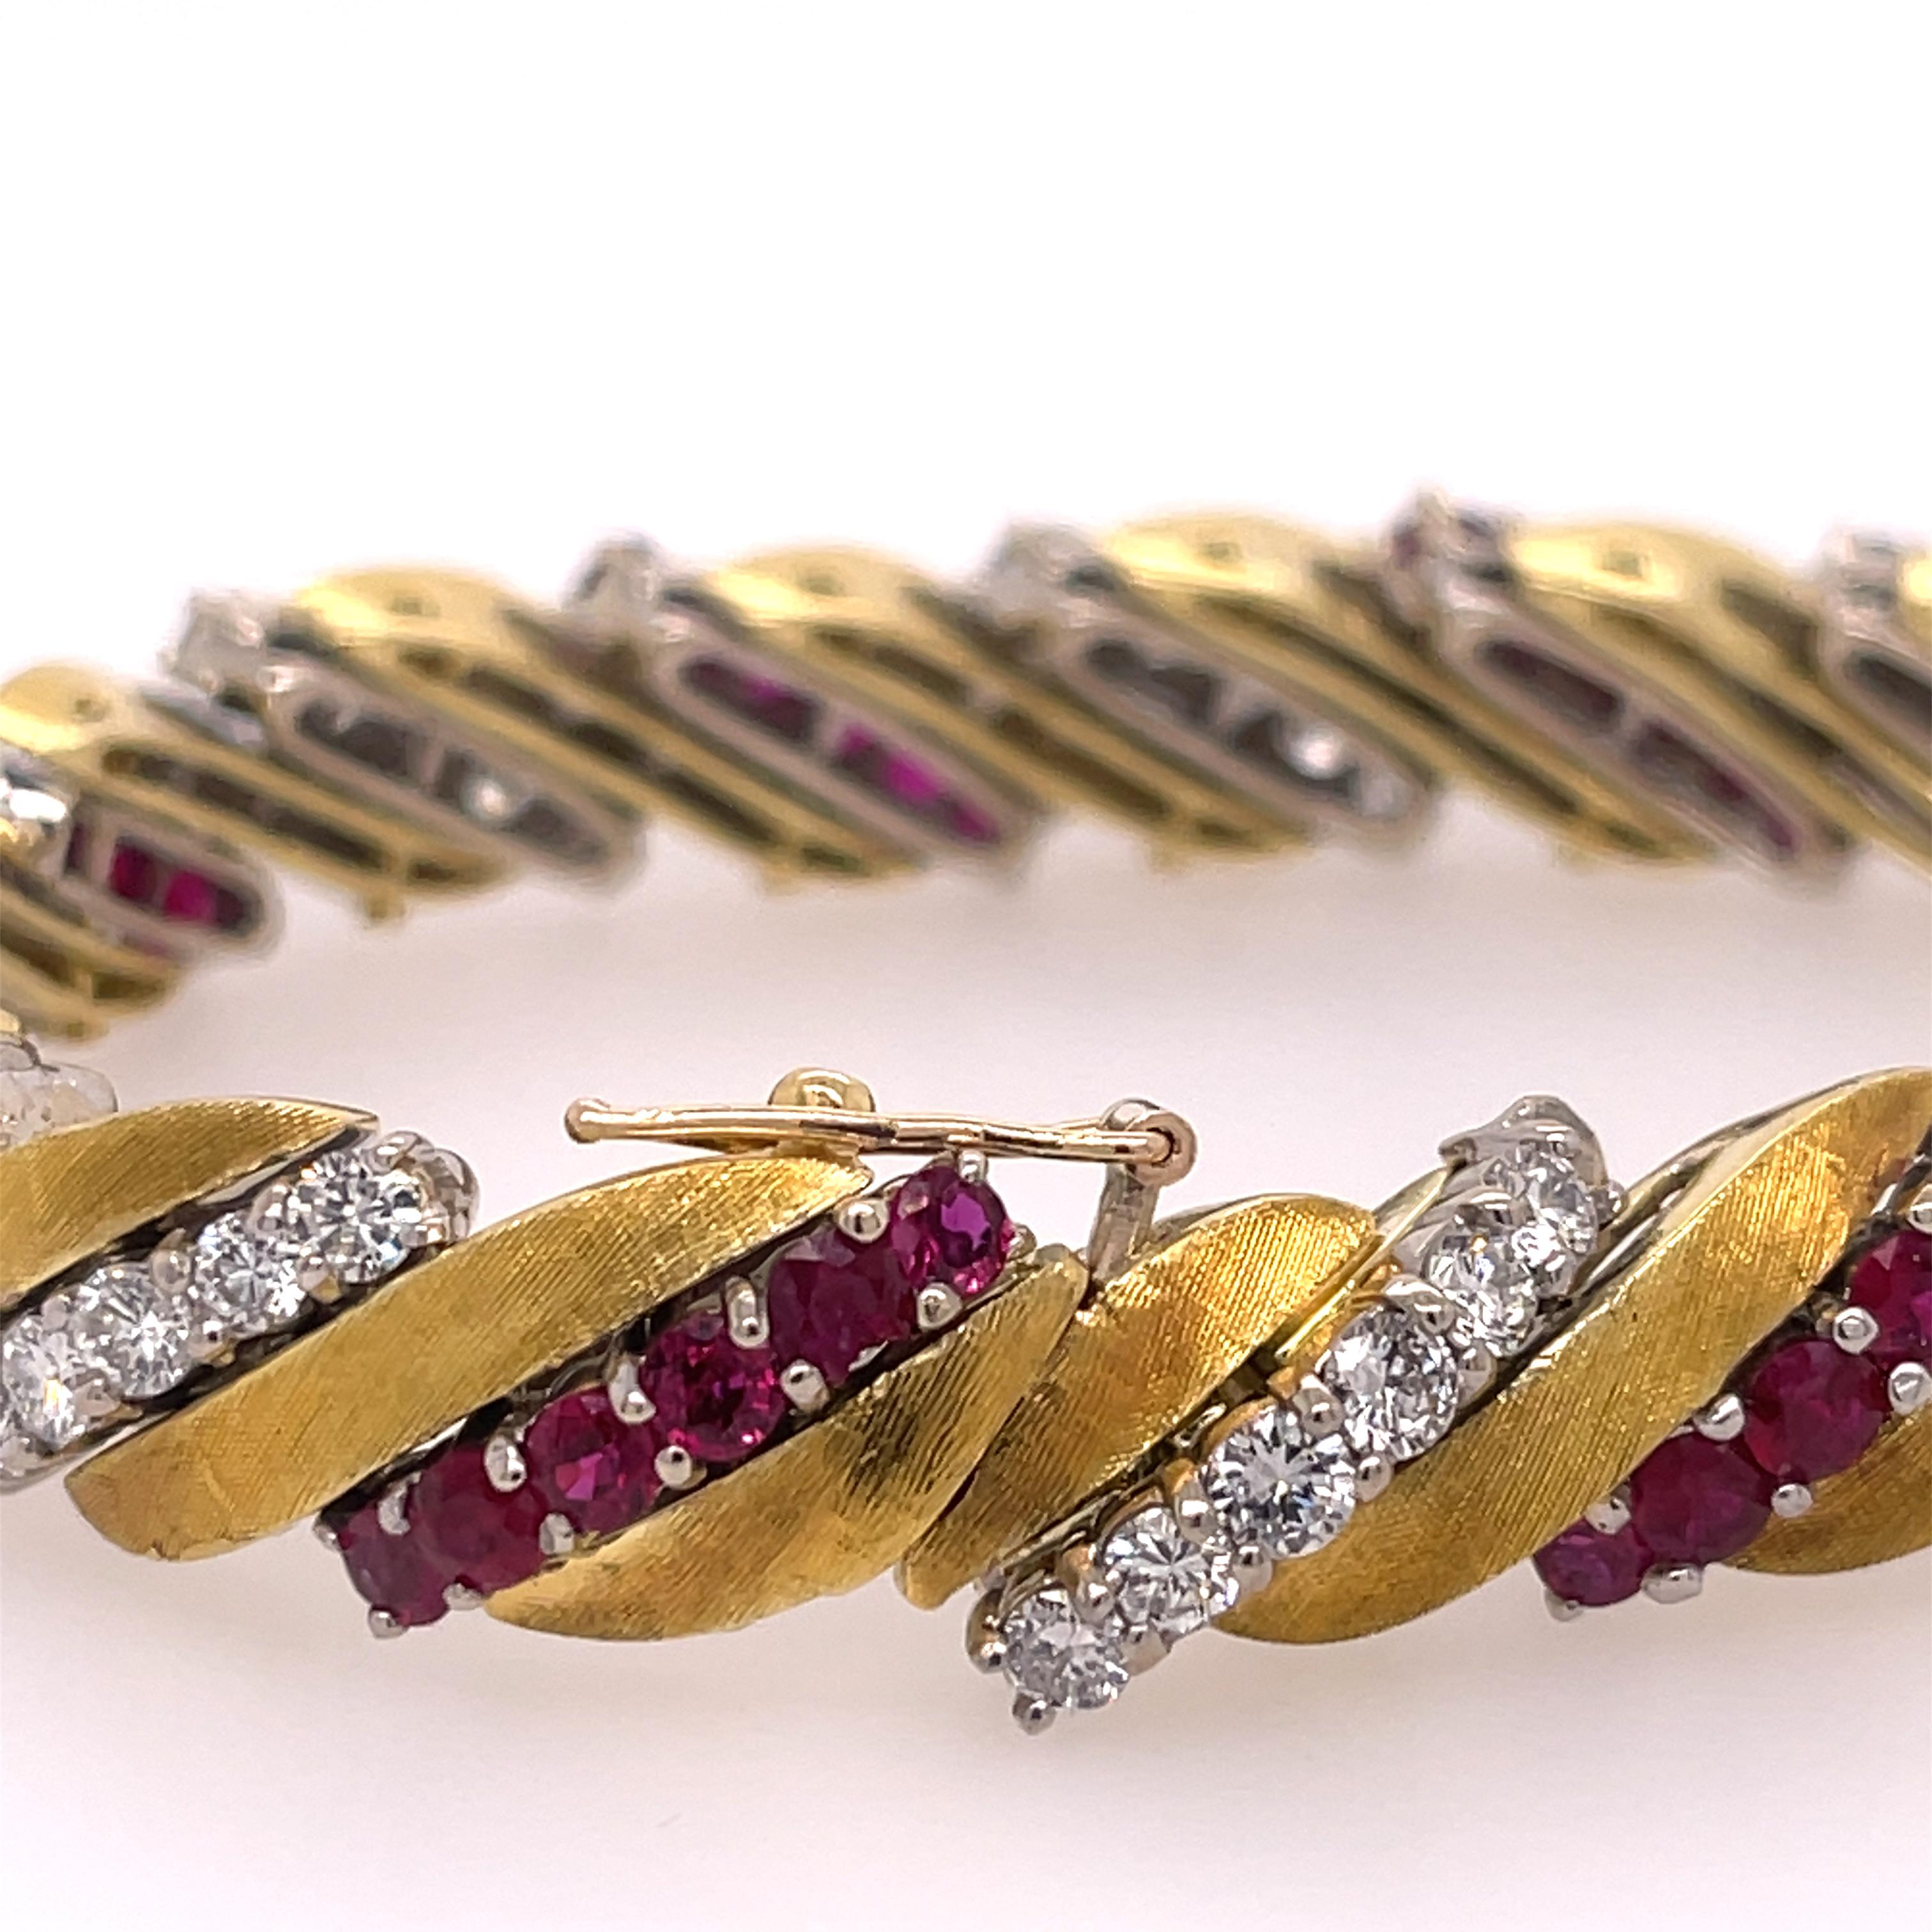 Ruby and diamond bracelet set in platinum and 18k yellow gold. There is approximately 6ctw of rubies and 6ctw of diamonds. The bracelet is 7 inches in length. 